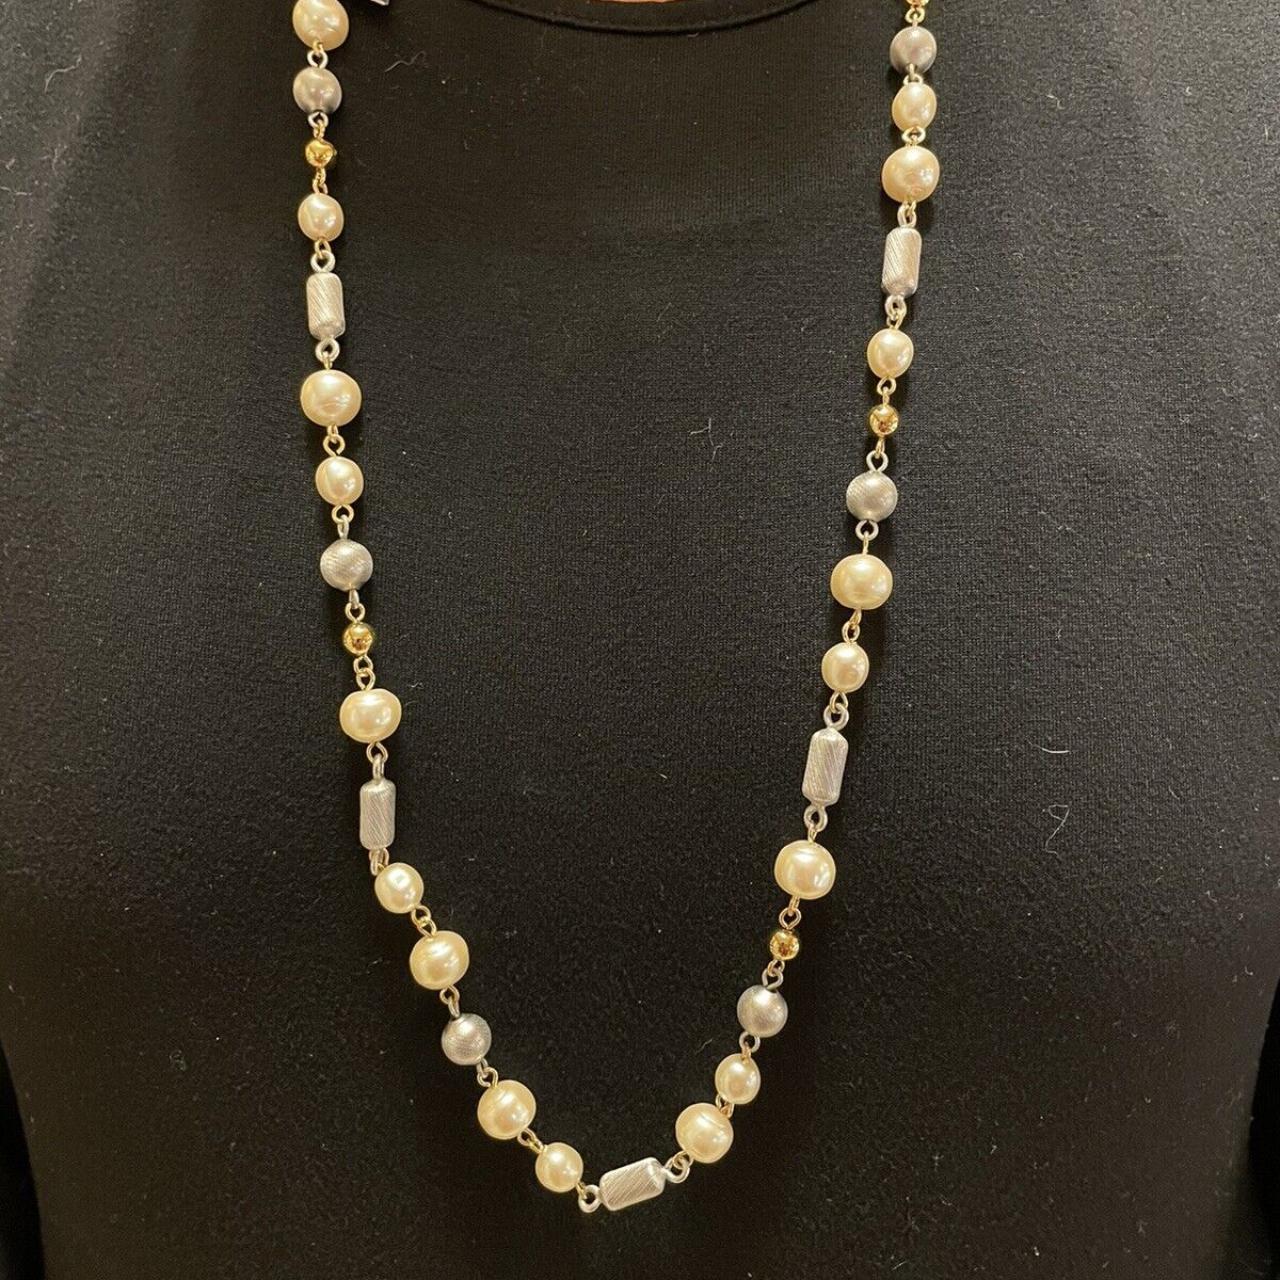 Strand of Monet Faux Pearl Necklace 16